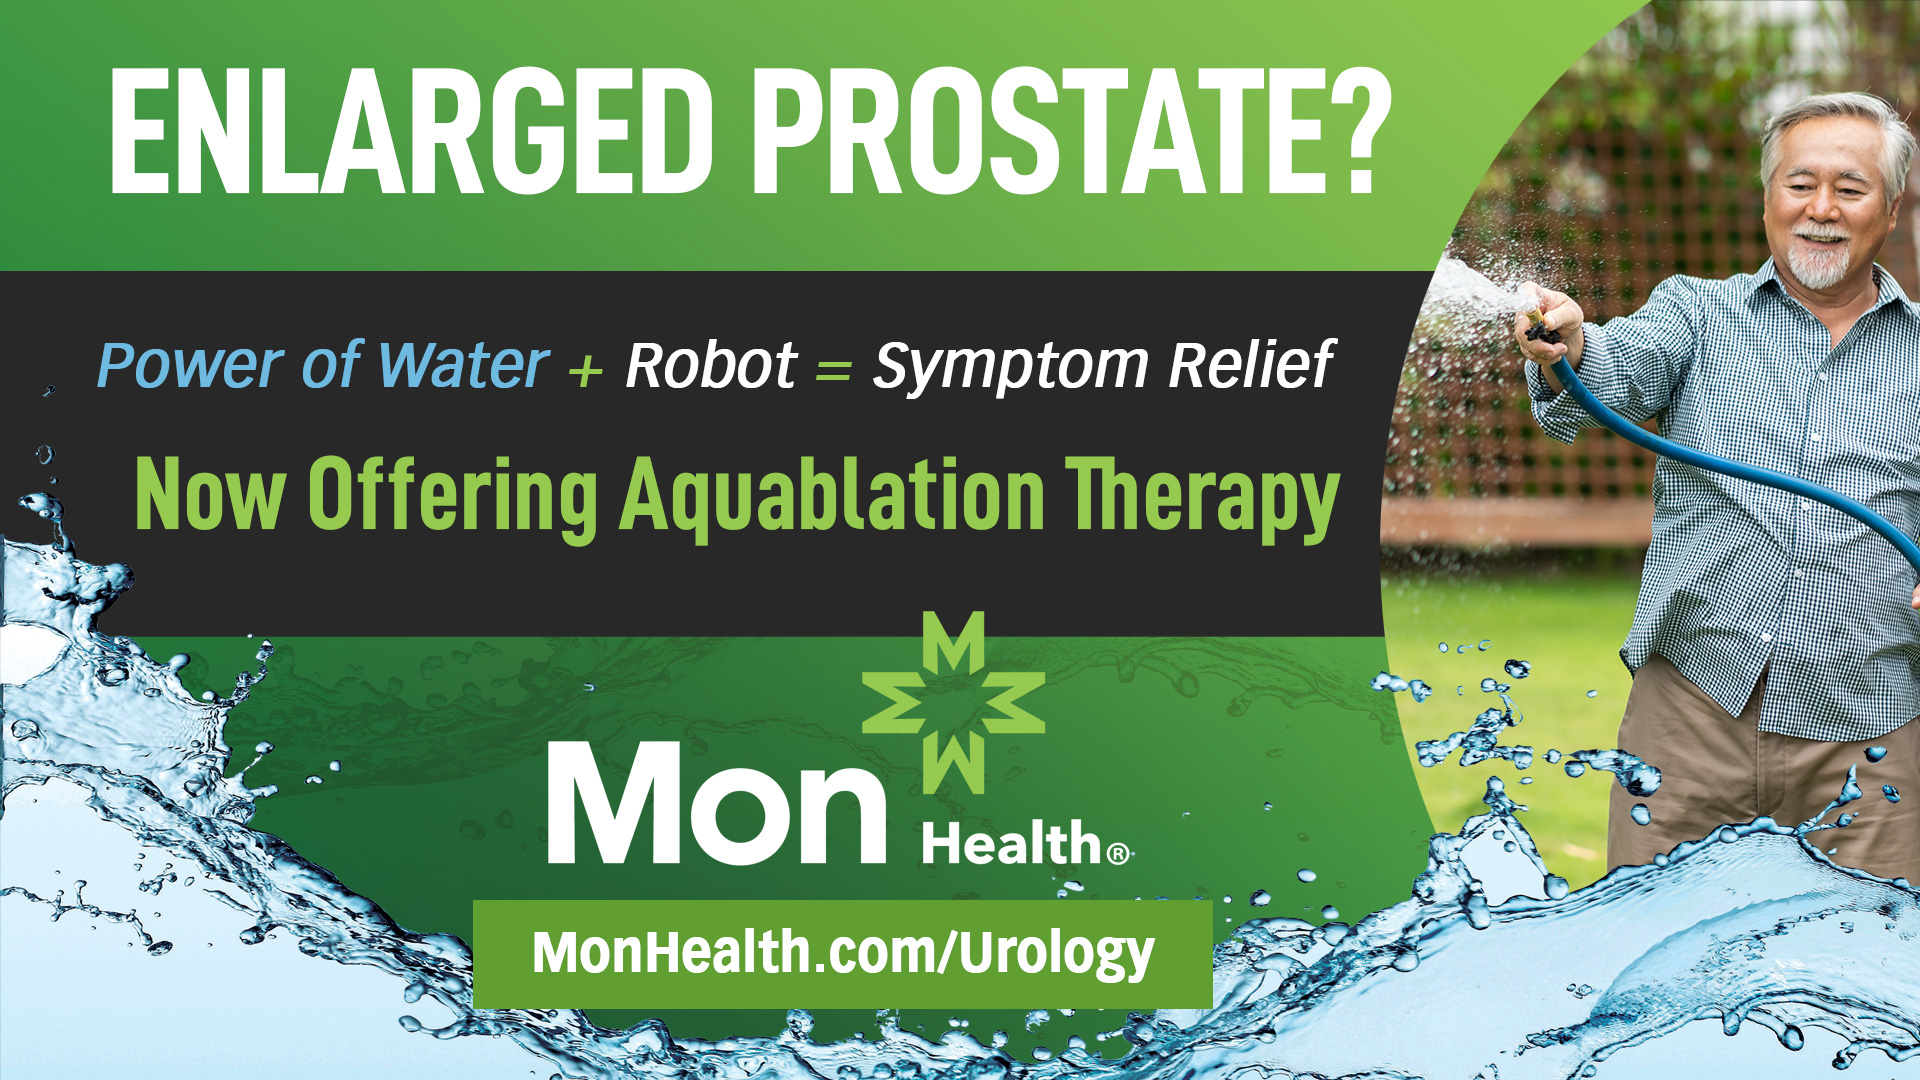 Enlarged Prostate? Now Offering Aquablation Therapy